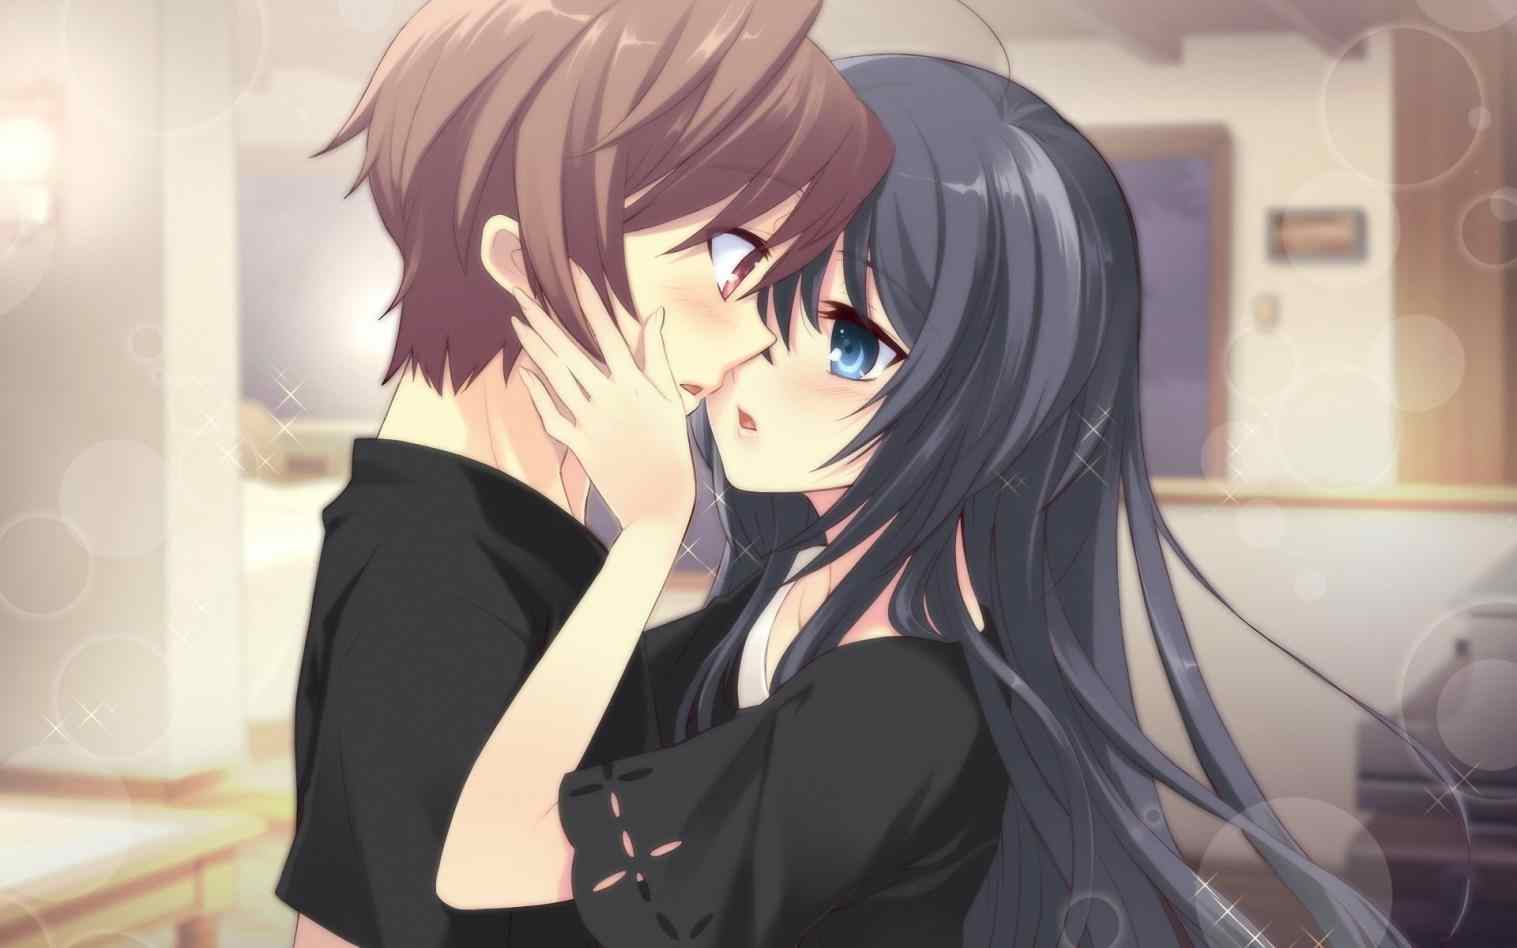 Wallpapers anime girl x anime boy tenderness kiss room hd picture